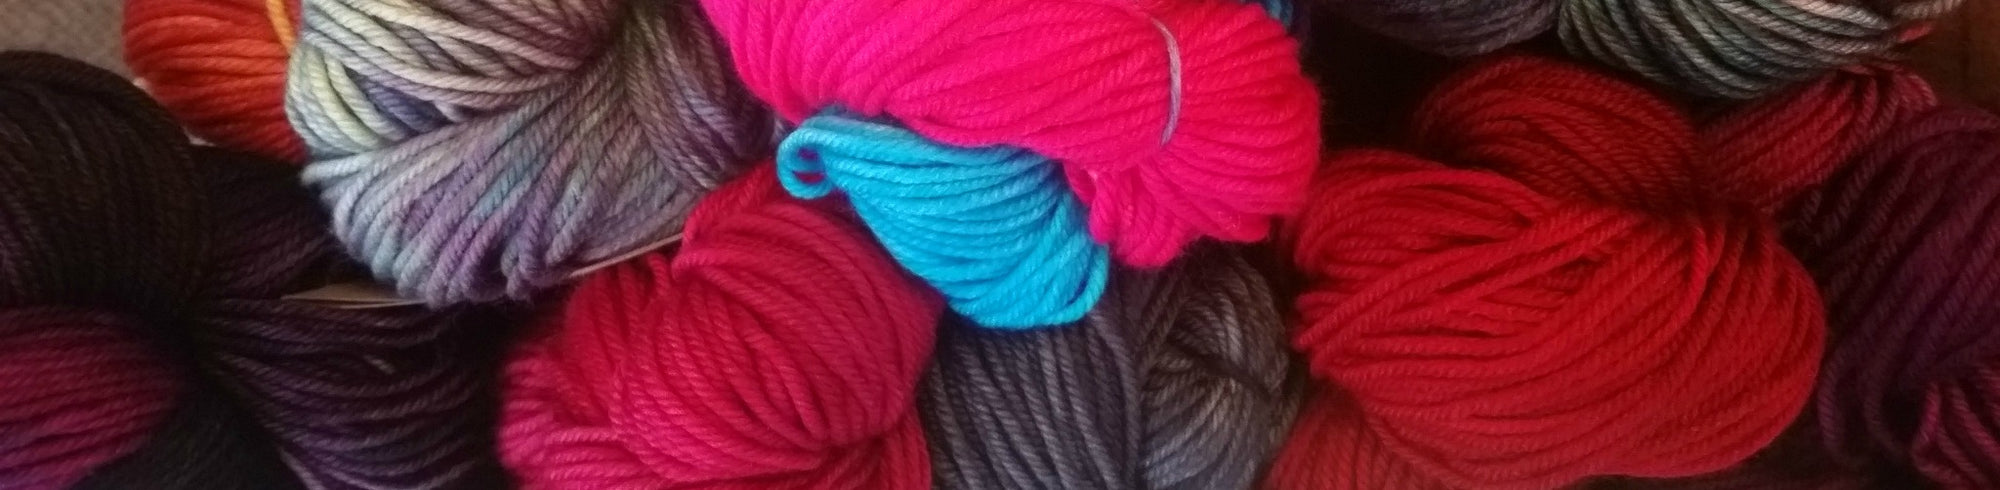 10 Tips to Improve Your Knitting and Crochet